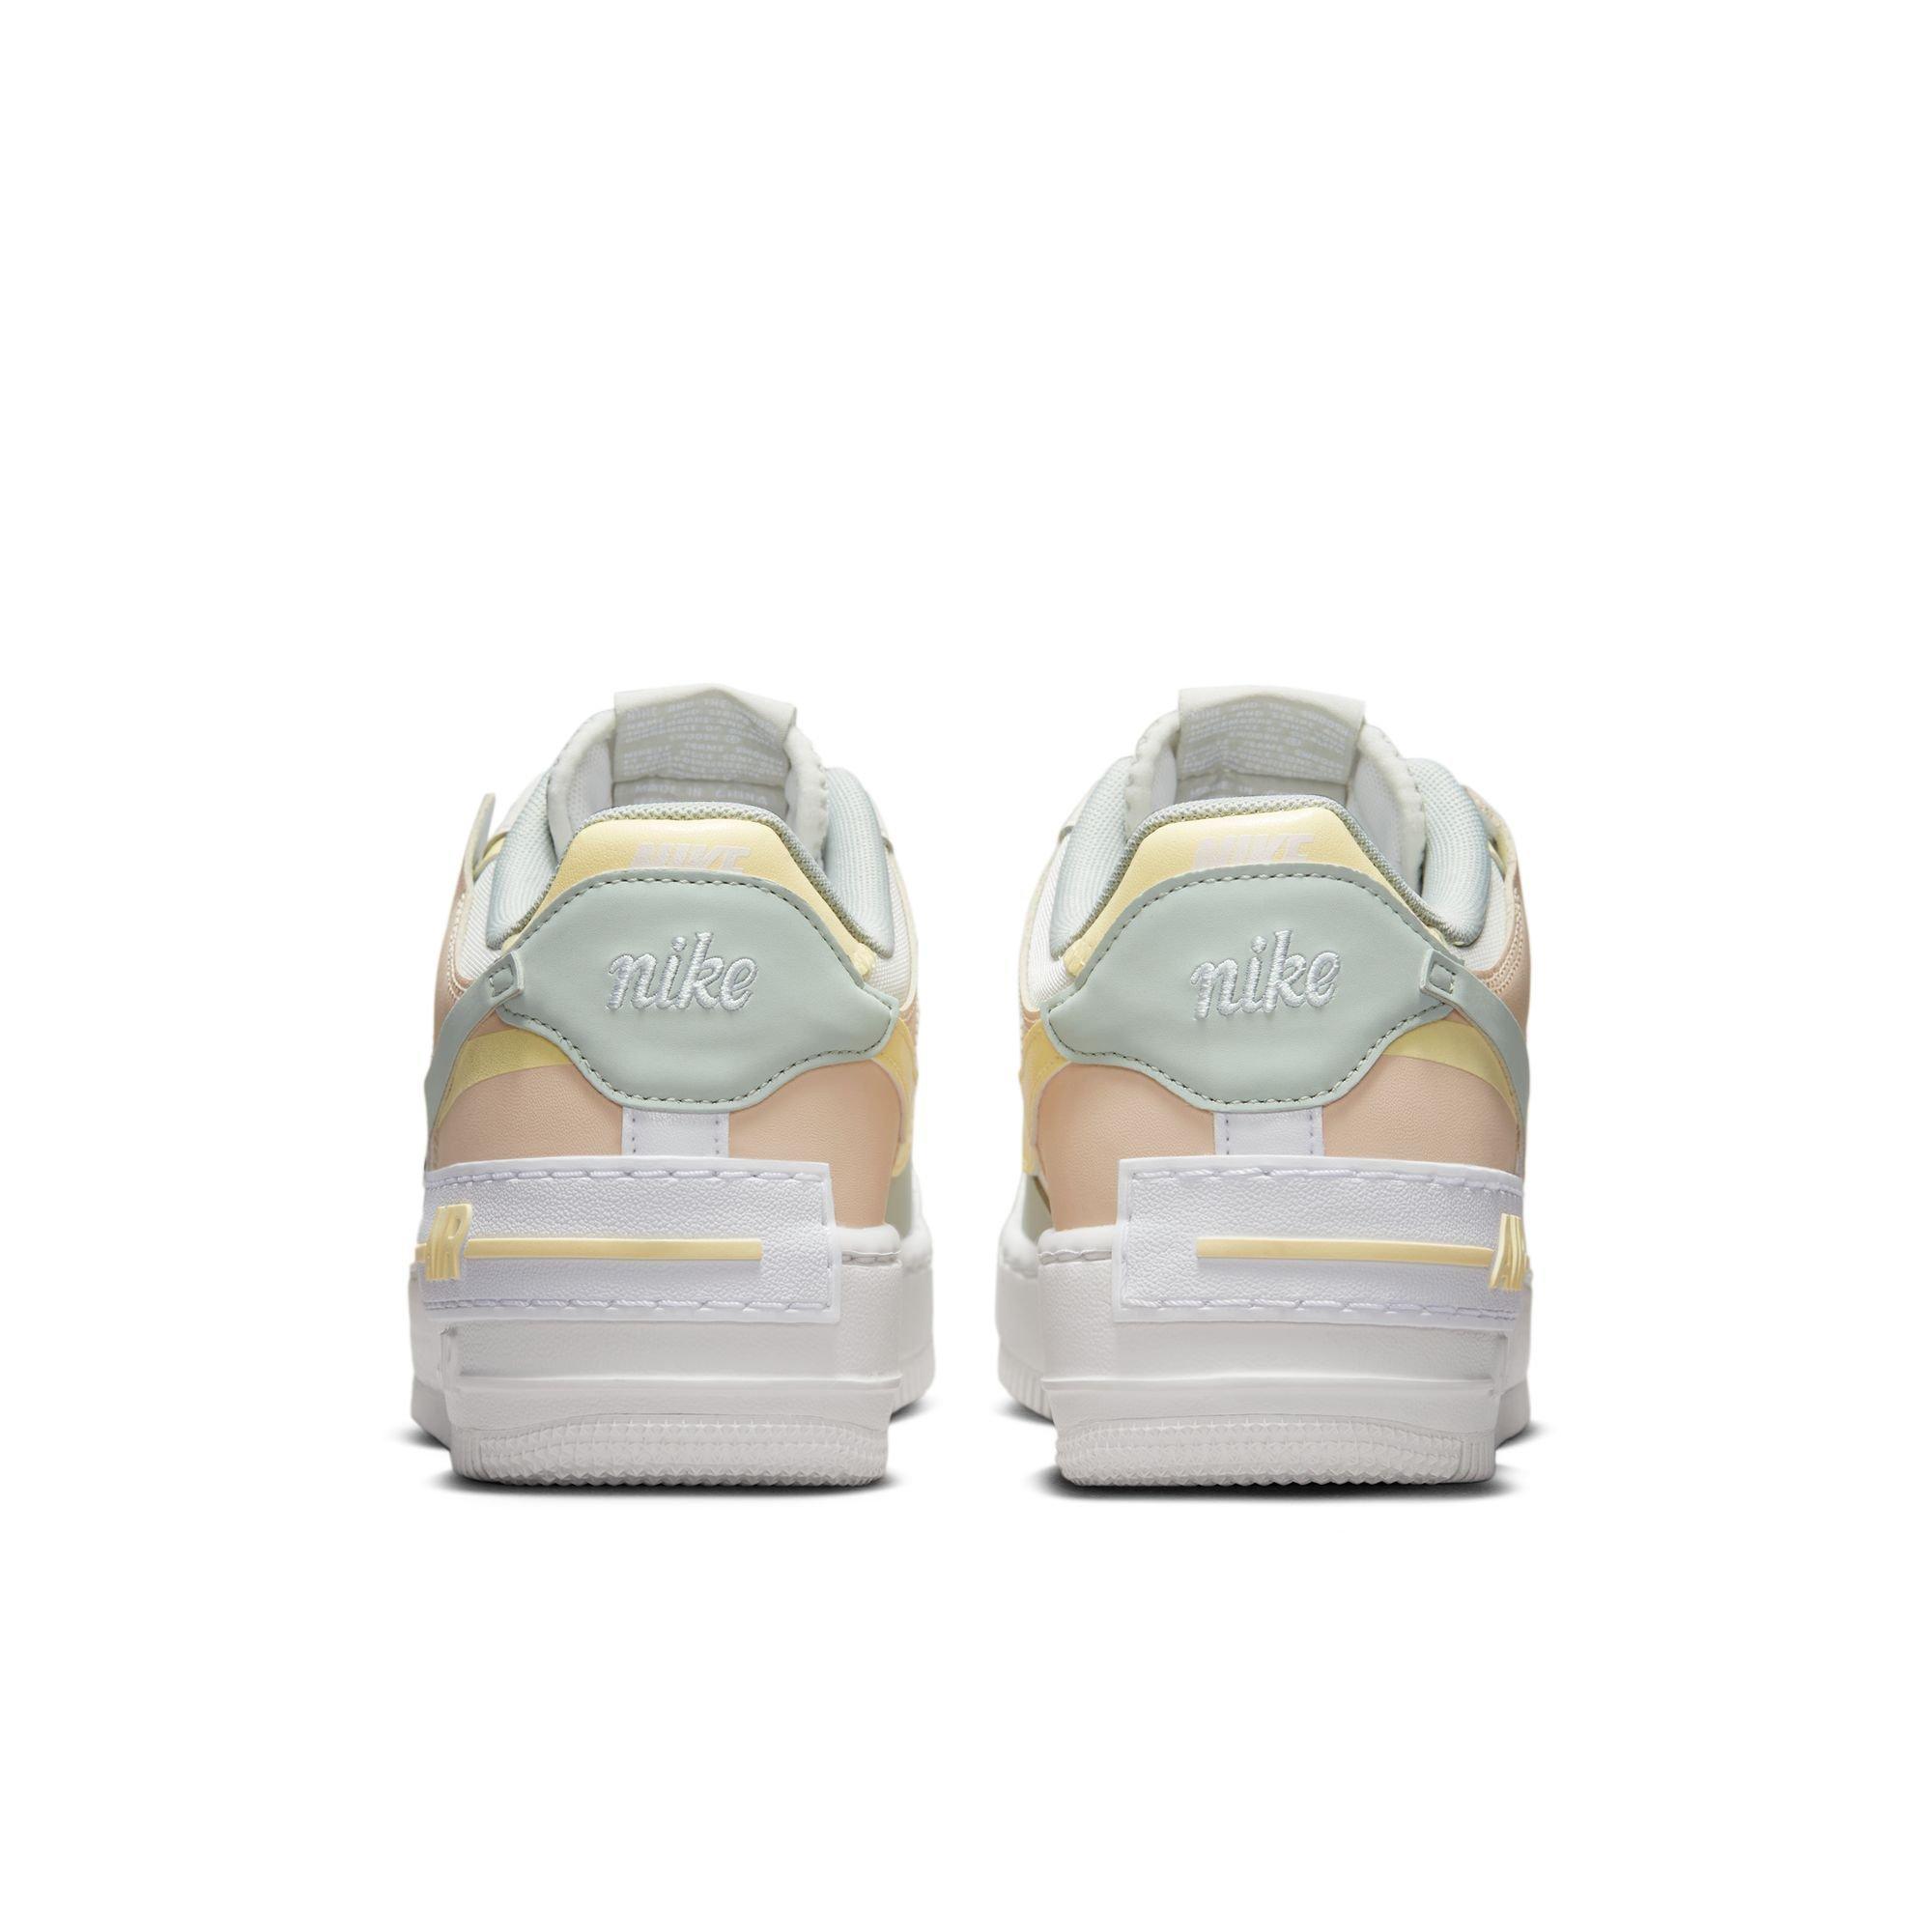 Nike Air Force 1 Shadow Sail/Light Silver/Citron Tint Women's Shoes, Size: 9.5